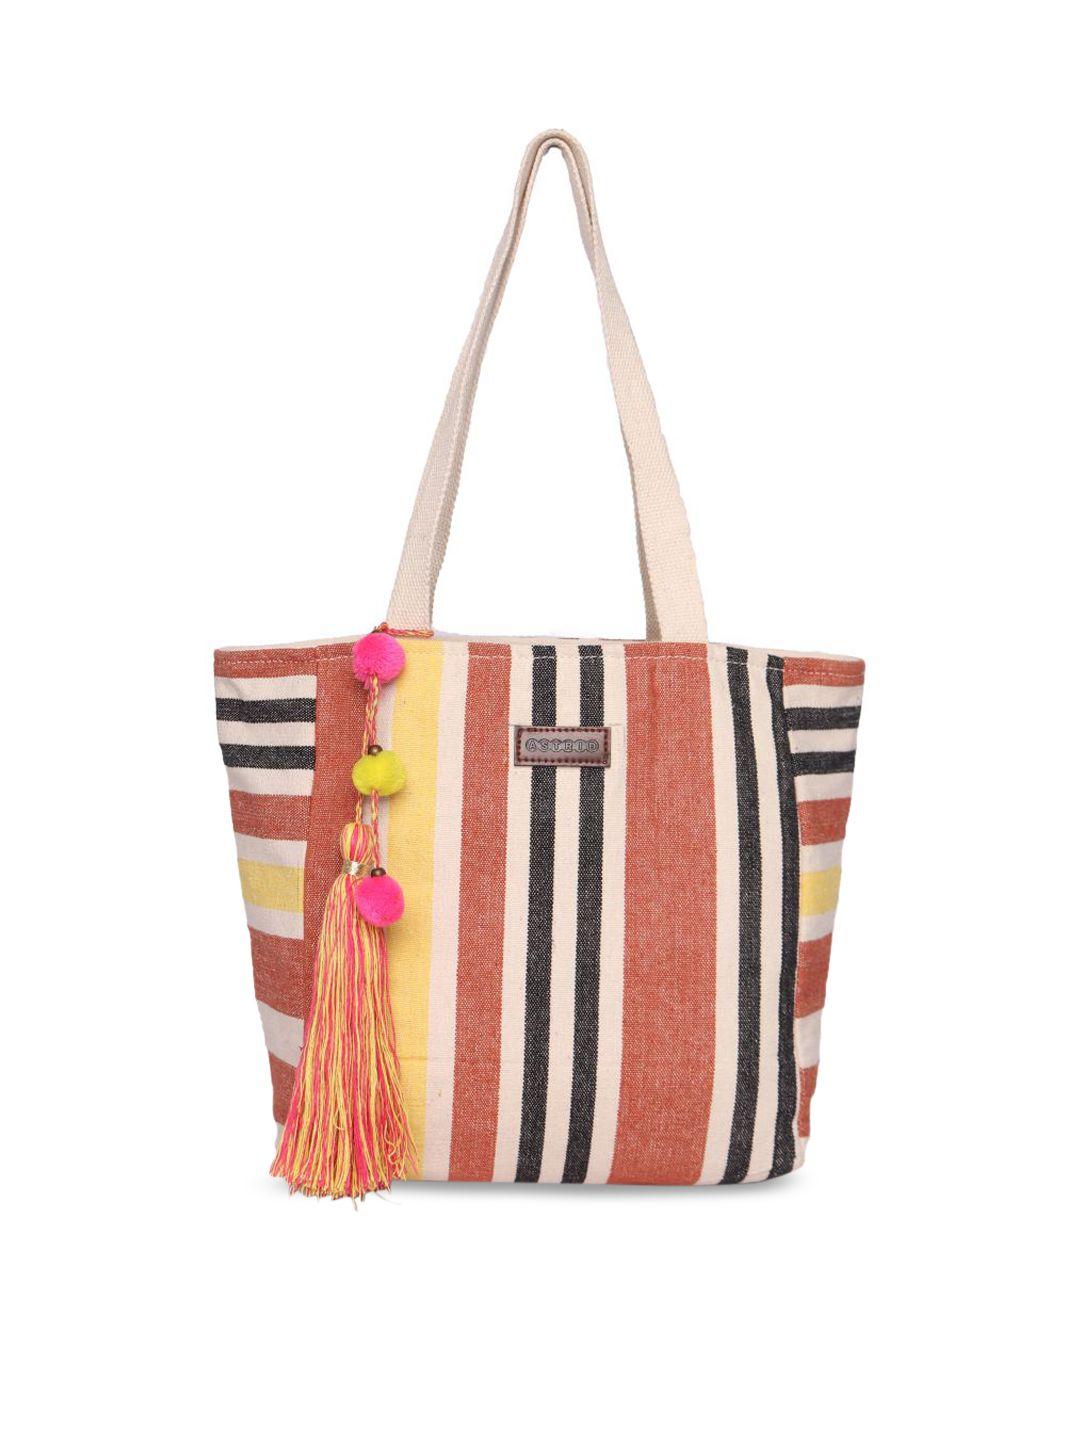 astrid multicoloured striped oversized shopper tote bag with tasselled